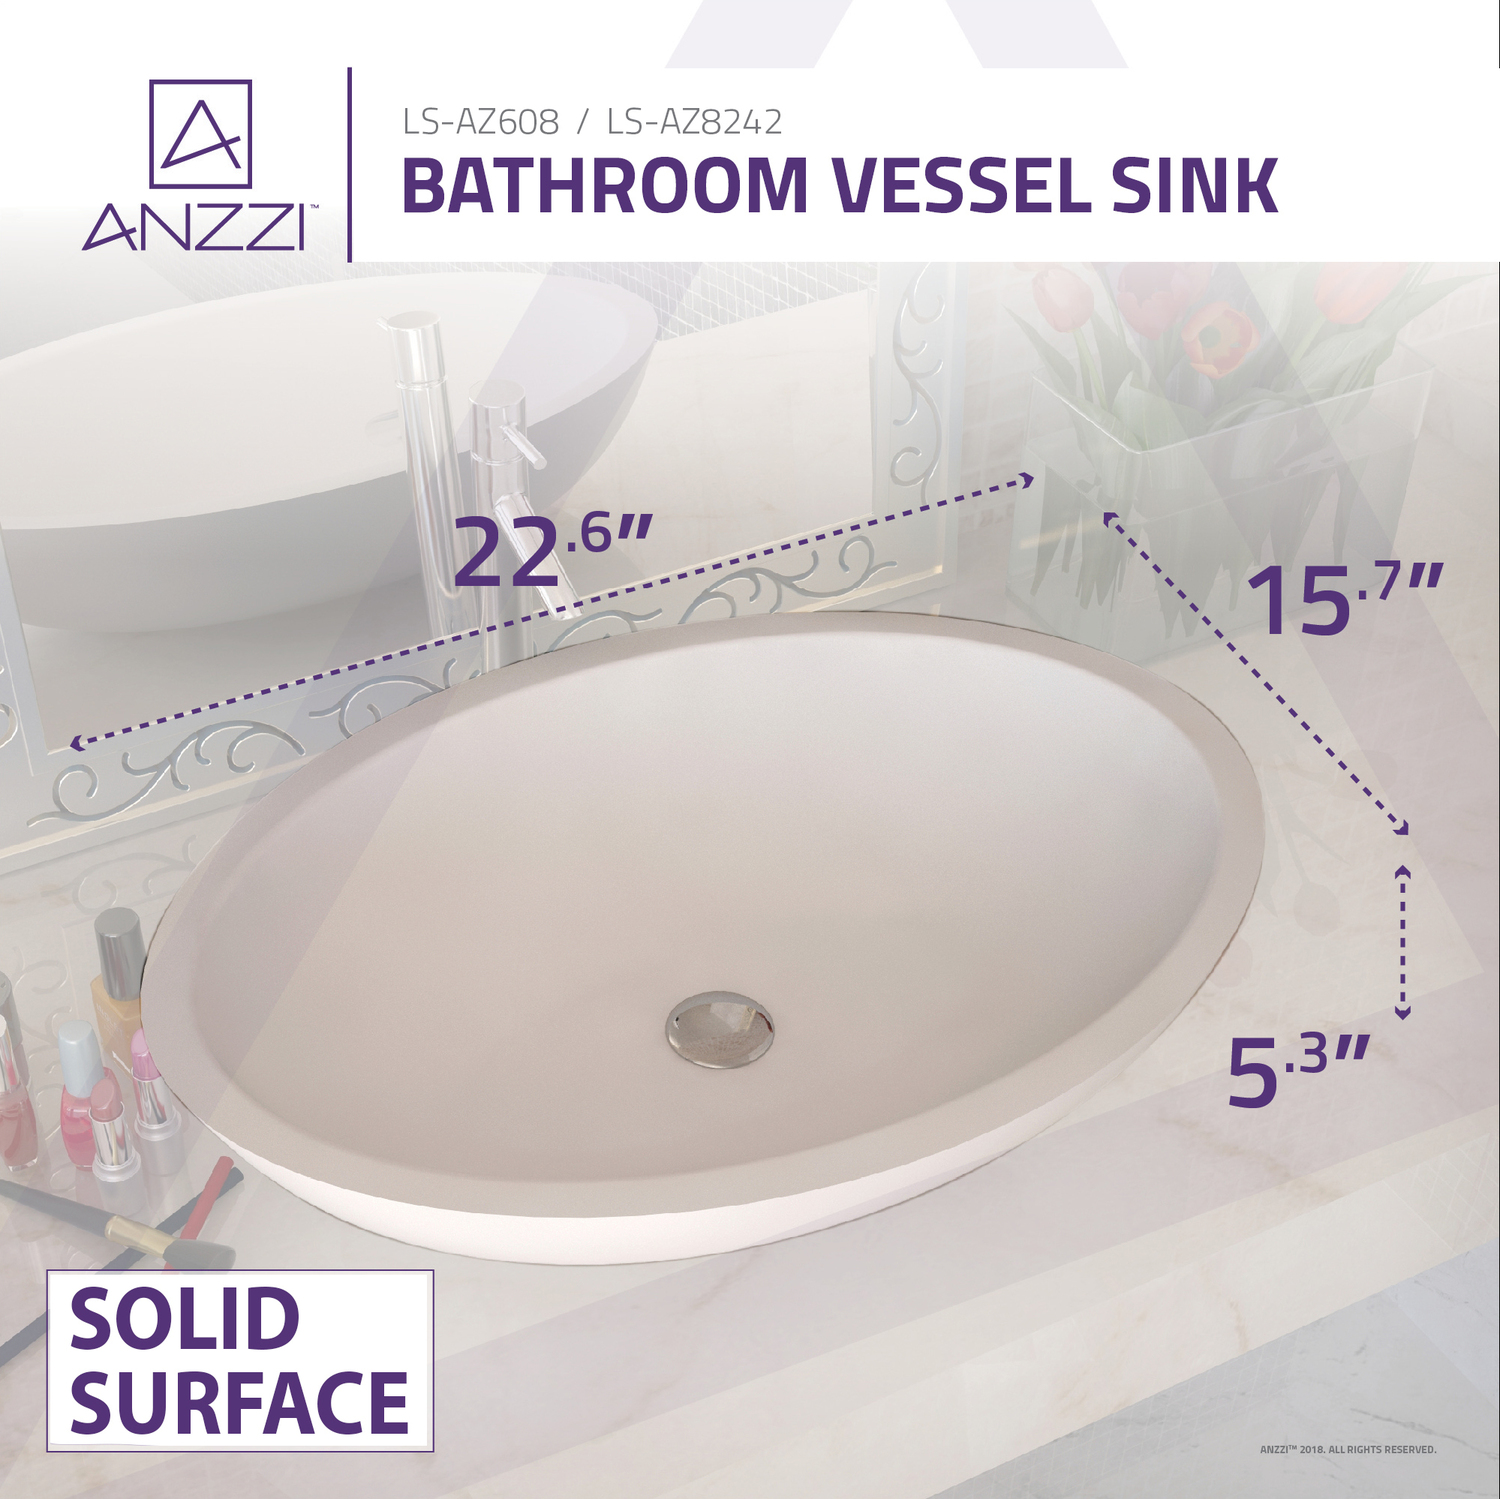 vanity and countertop Anzzi BATHROOM - Sinks - Vessel - Man Made Stone White